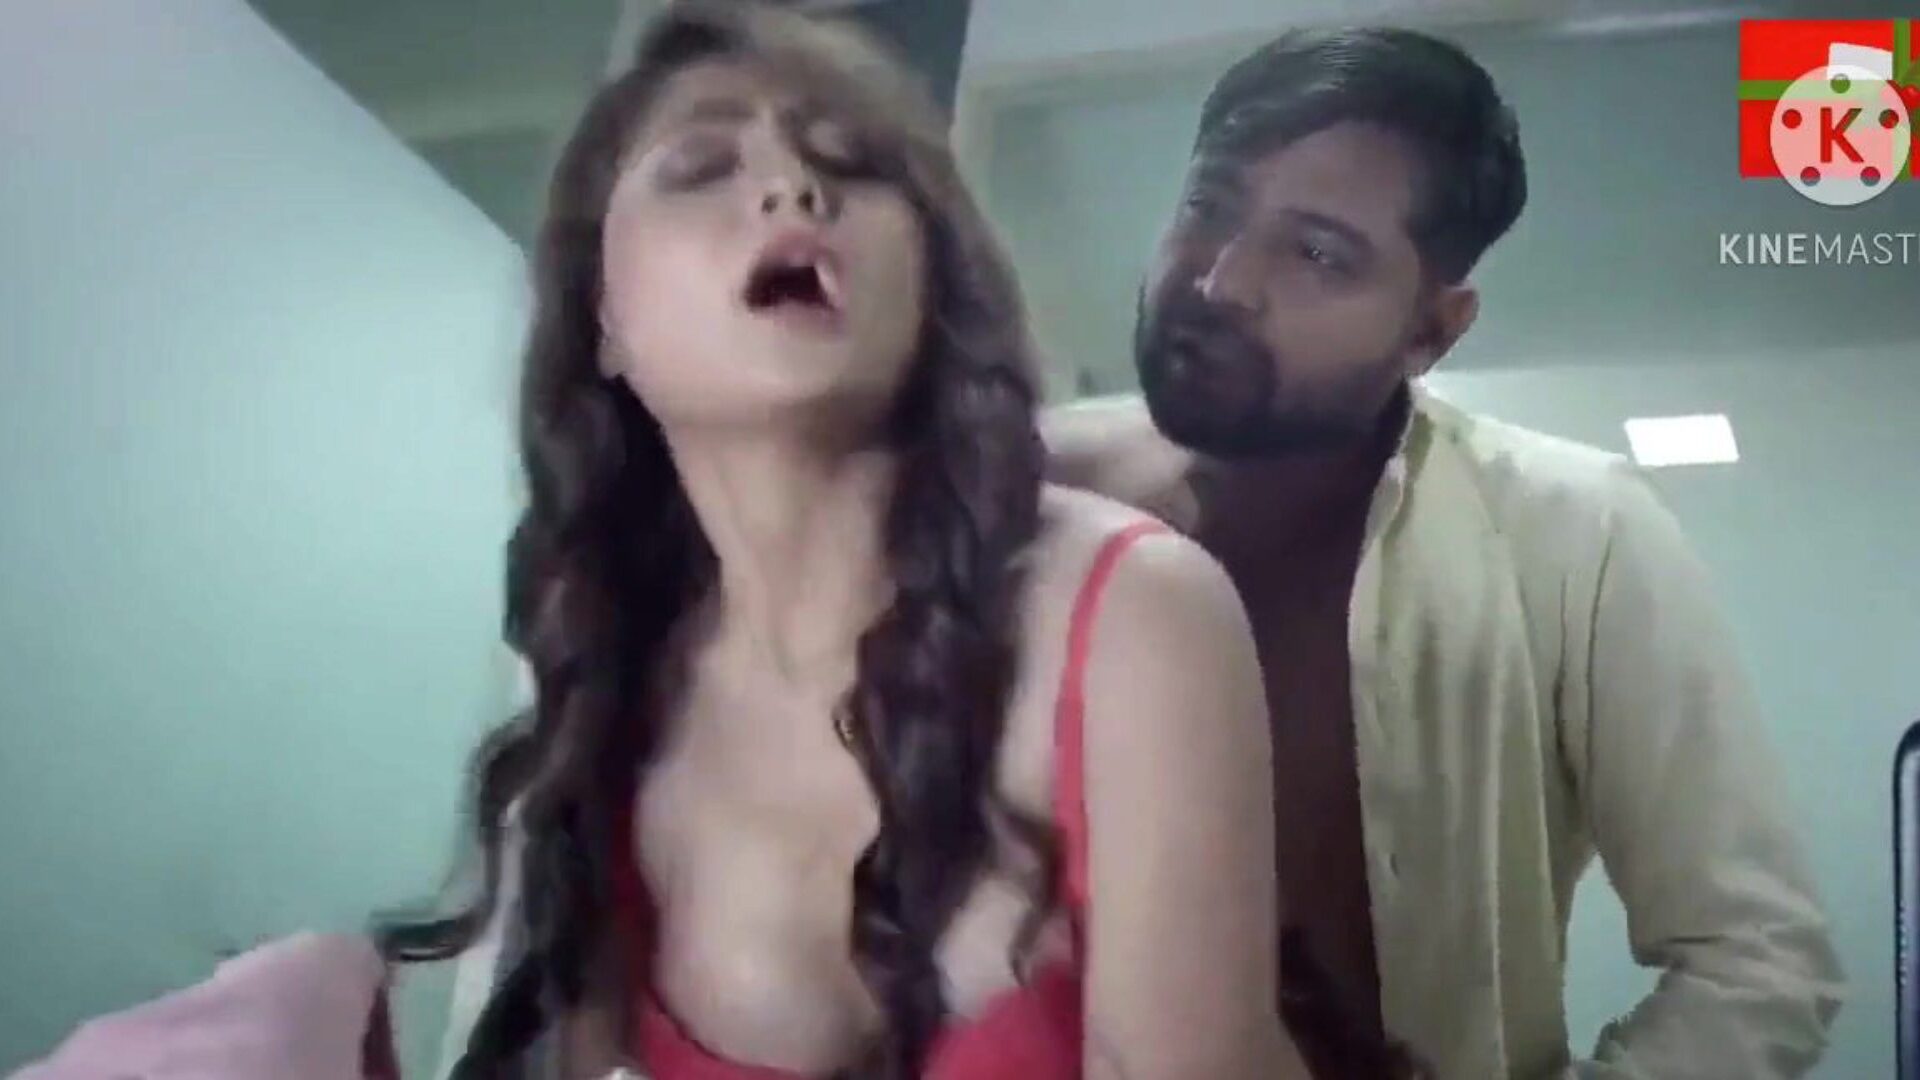 Desi Indian Boss Radadiya Fucked by Colleague: Free Porn b1 Watch Desi Indian Boss Radadiya Fucked by Colleague clip on xHamster - the ultimate database of free-for-all Asian Indian Online Free HD porno tube movie scenes